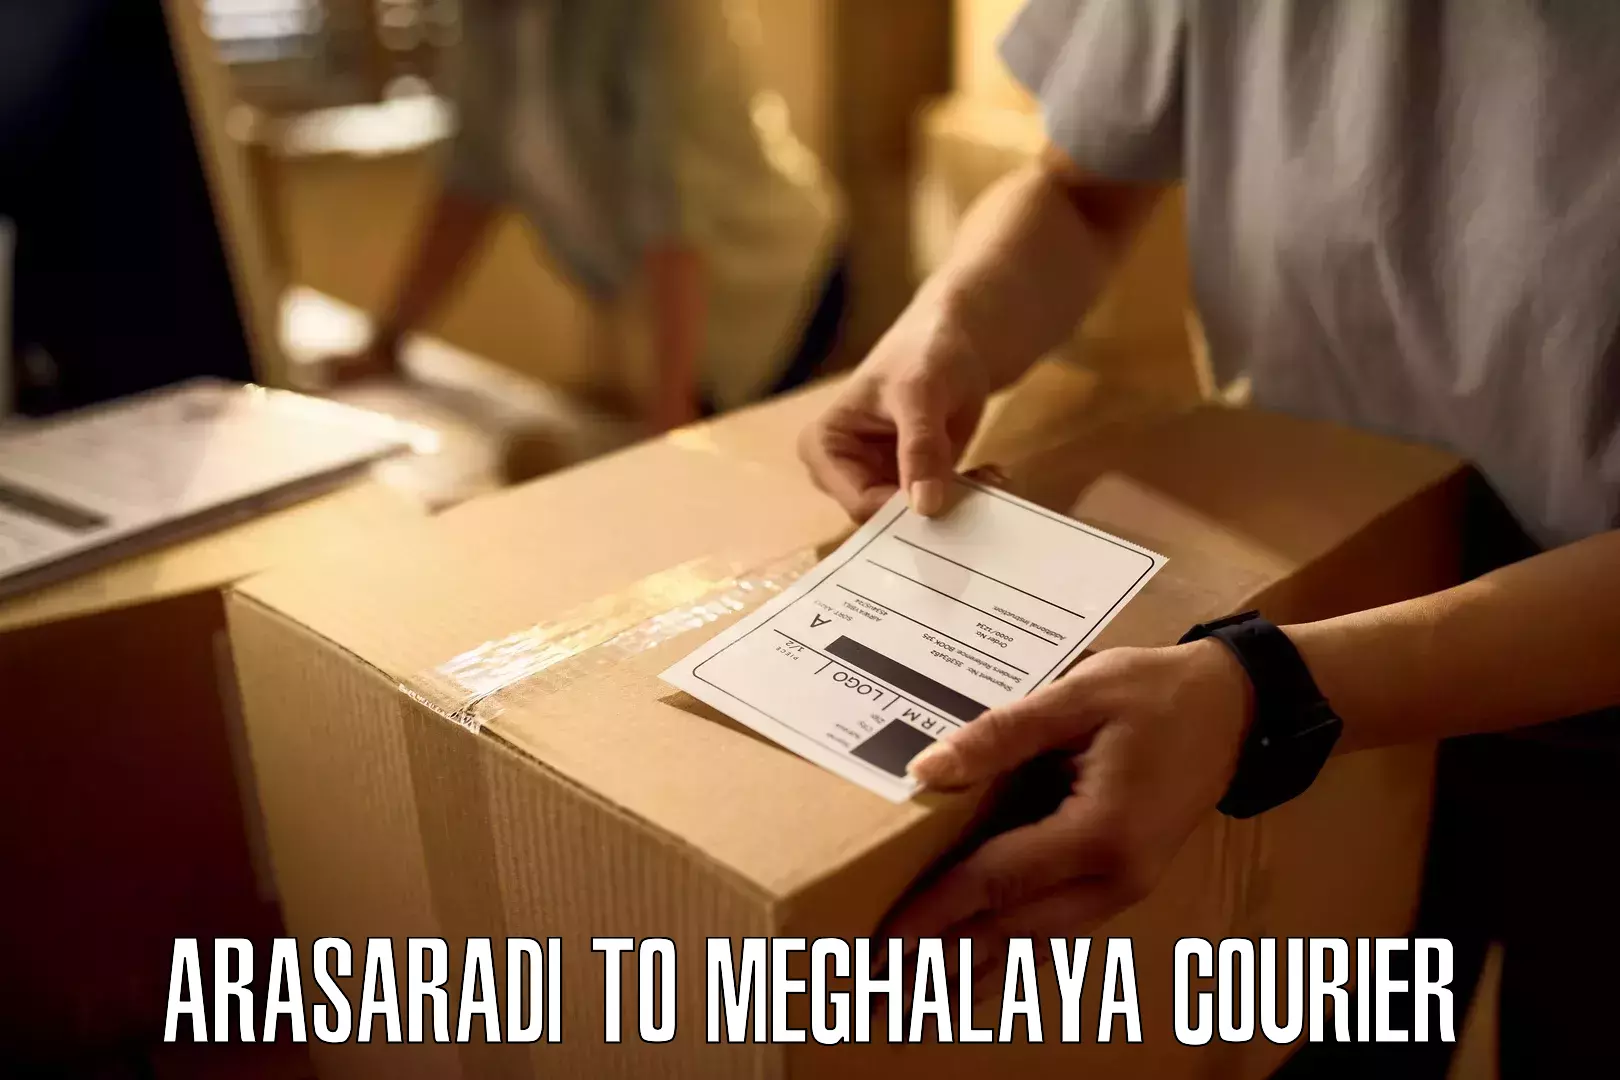 Courier service efficiency in Arasaradi to Tura